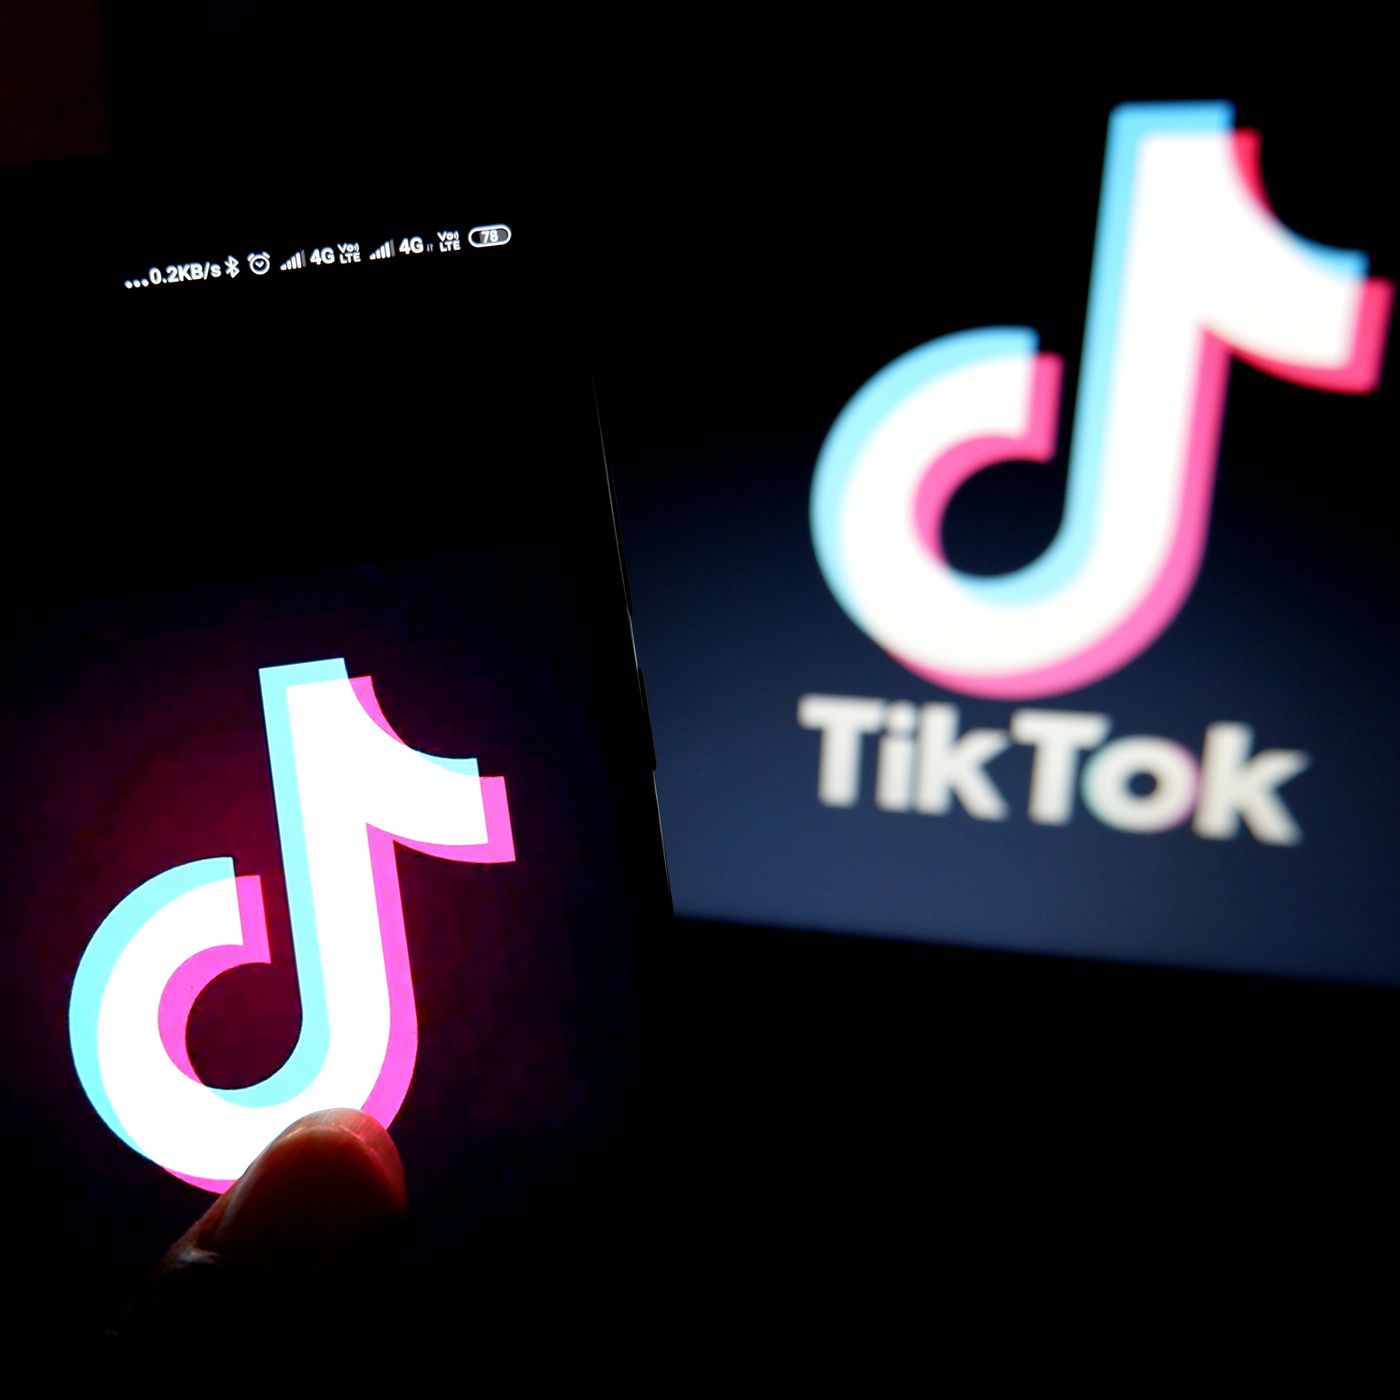 Tiktok Turns One The Top Hashtags And Happenings Of The Past 12 Months The Verge